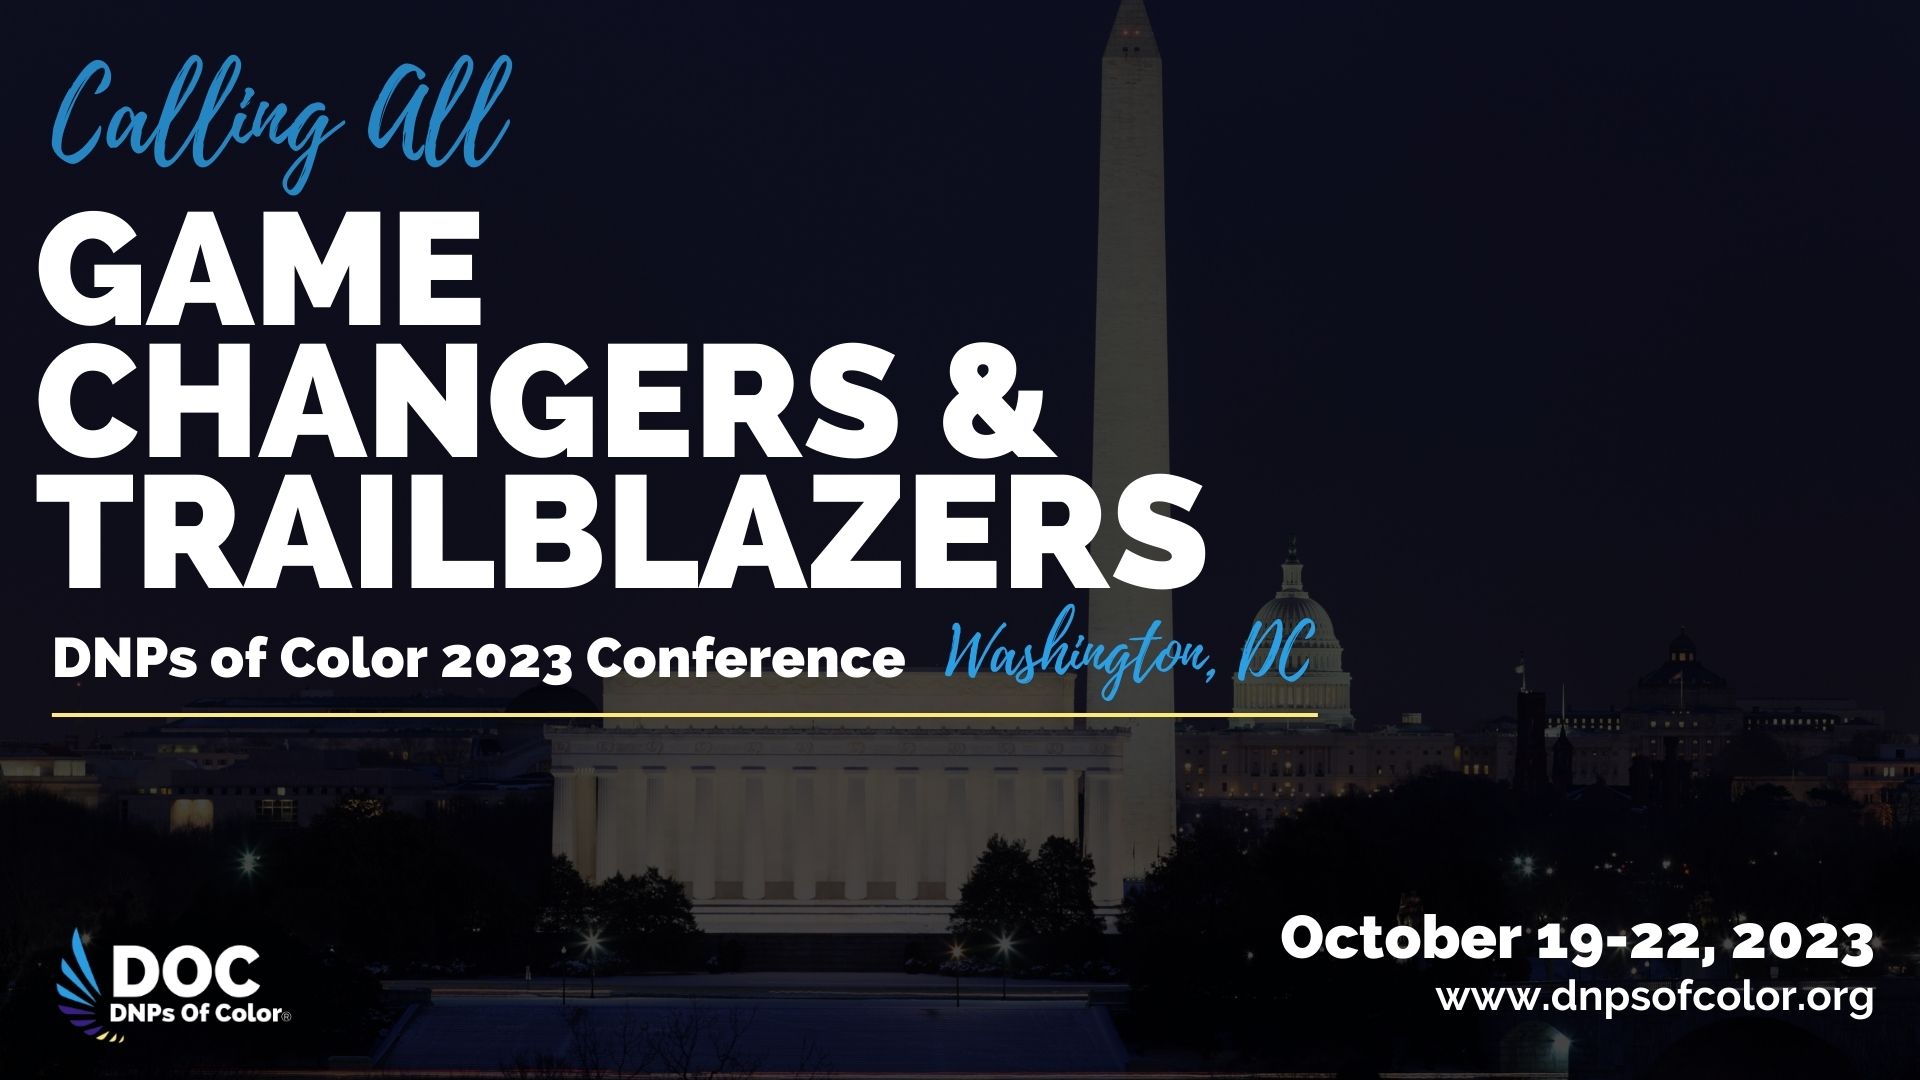 game changers and trailblazers save the date for the 2023 DNPs of Color Annual Conference Oct 19 - 22 2023